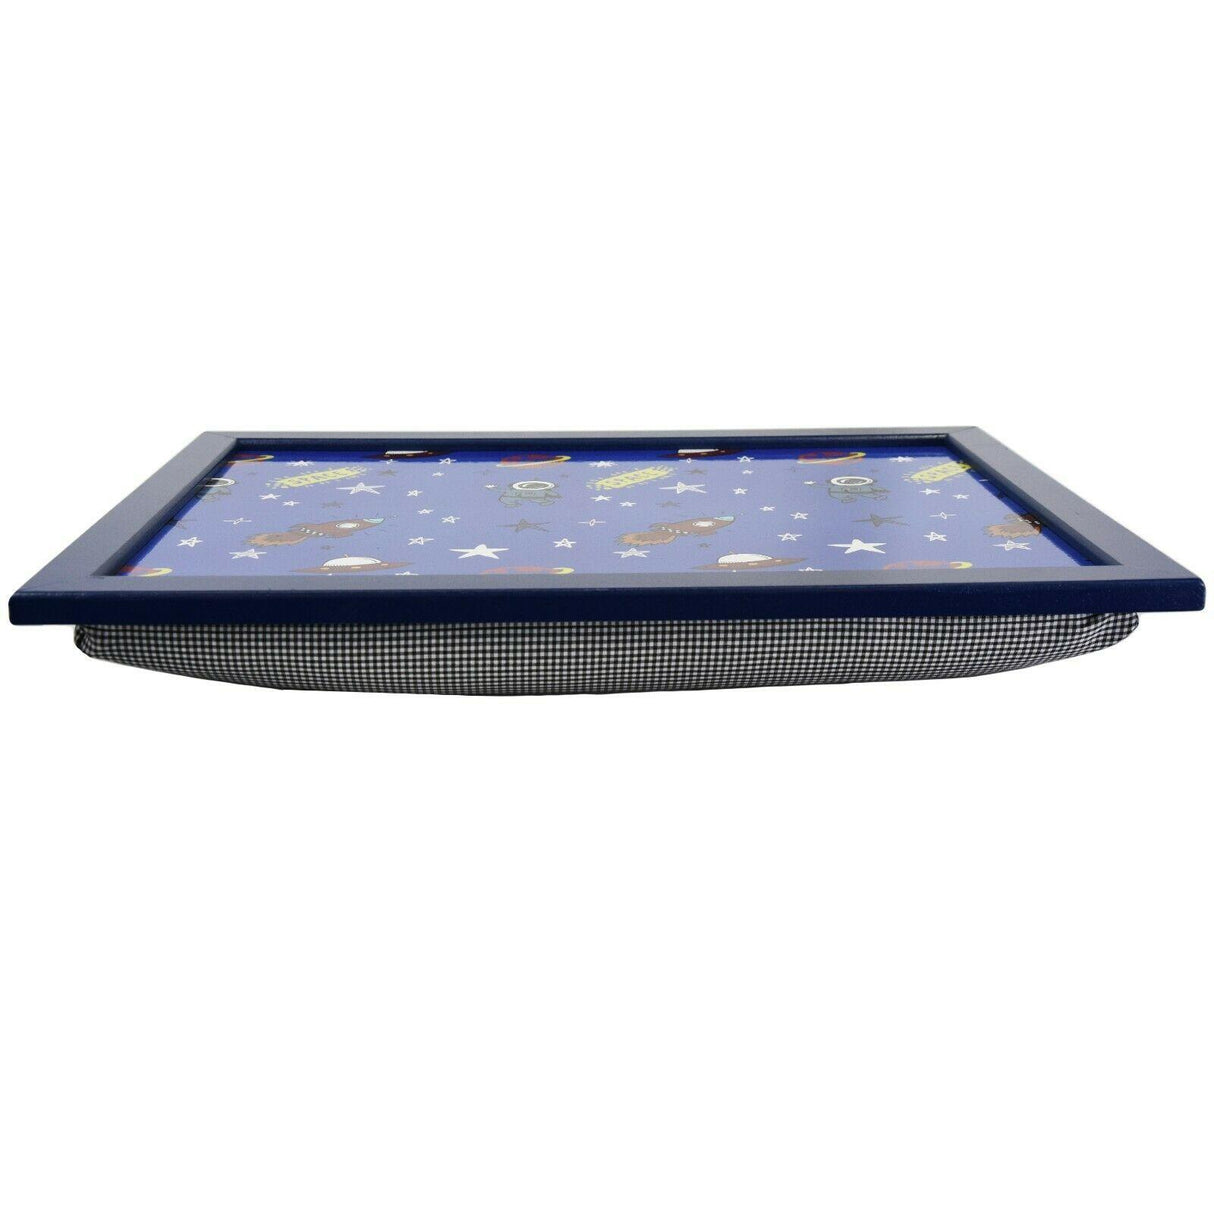 Space Lap Tray With Bean Bag Cushion by Geezy - UKBuyZone